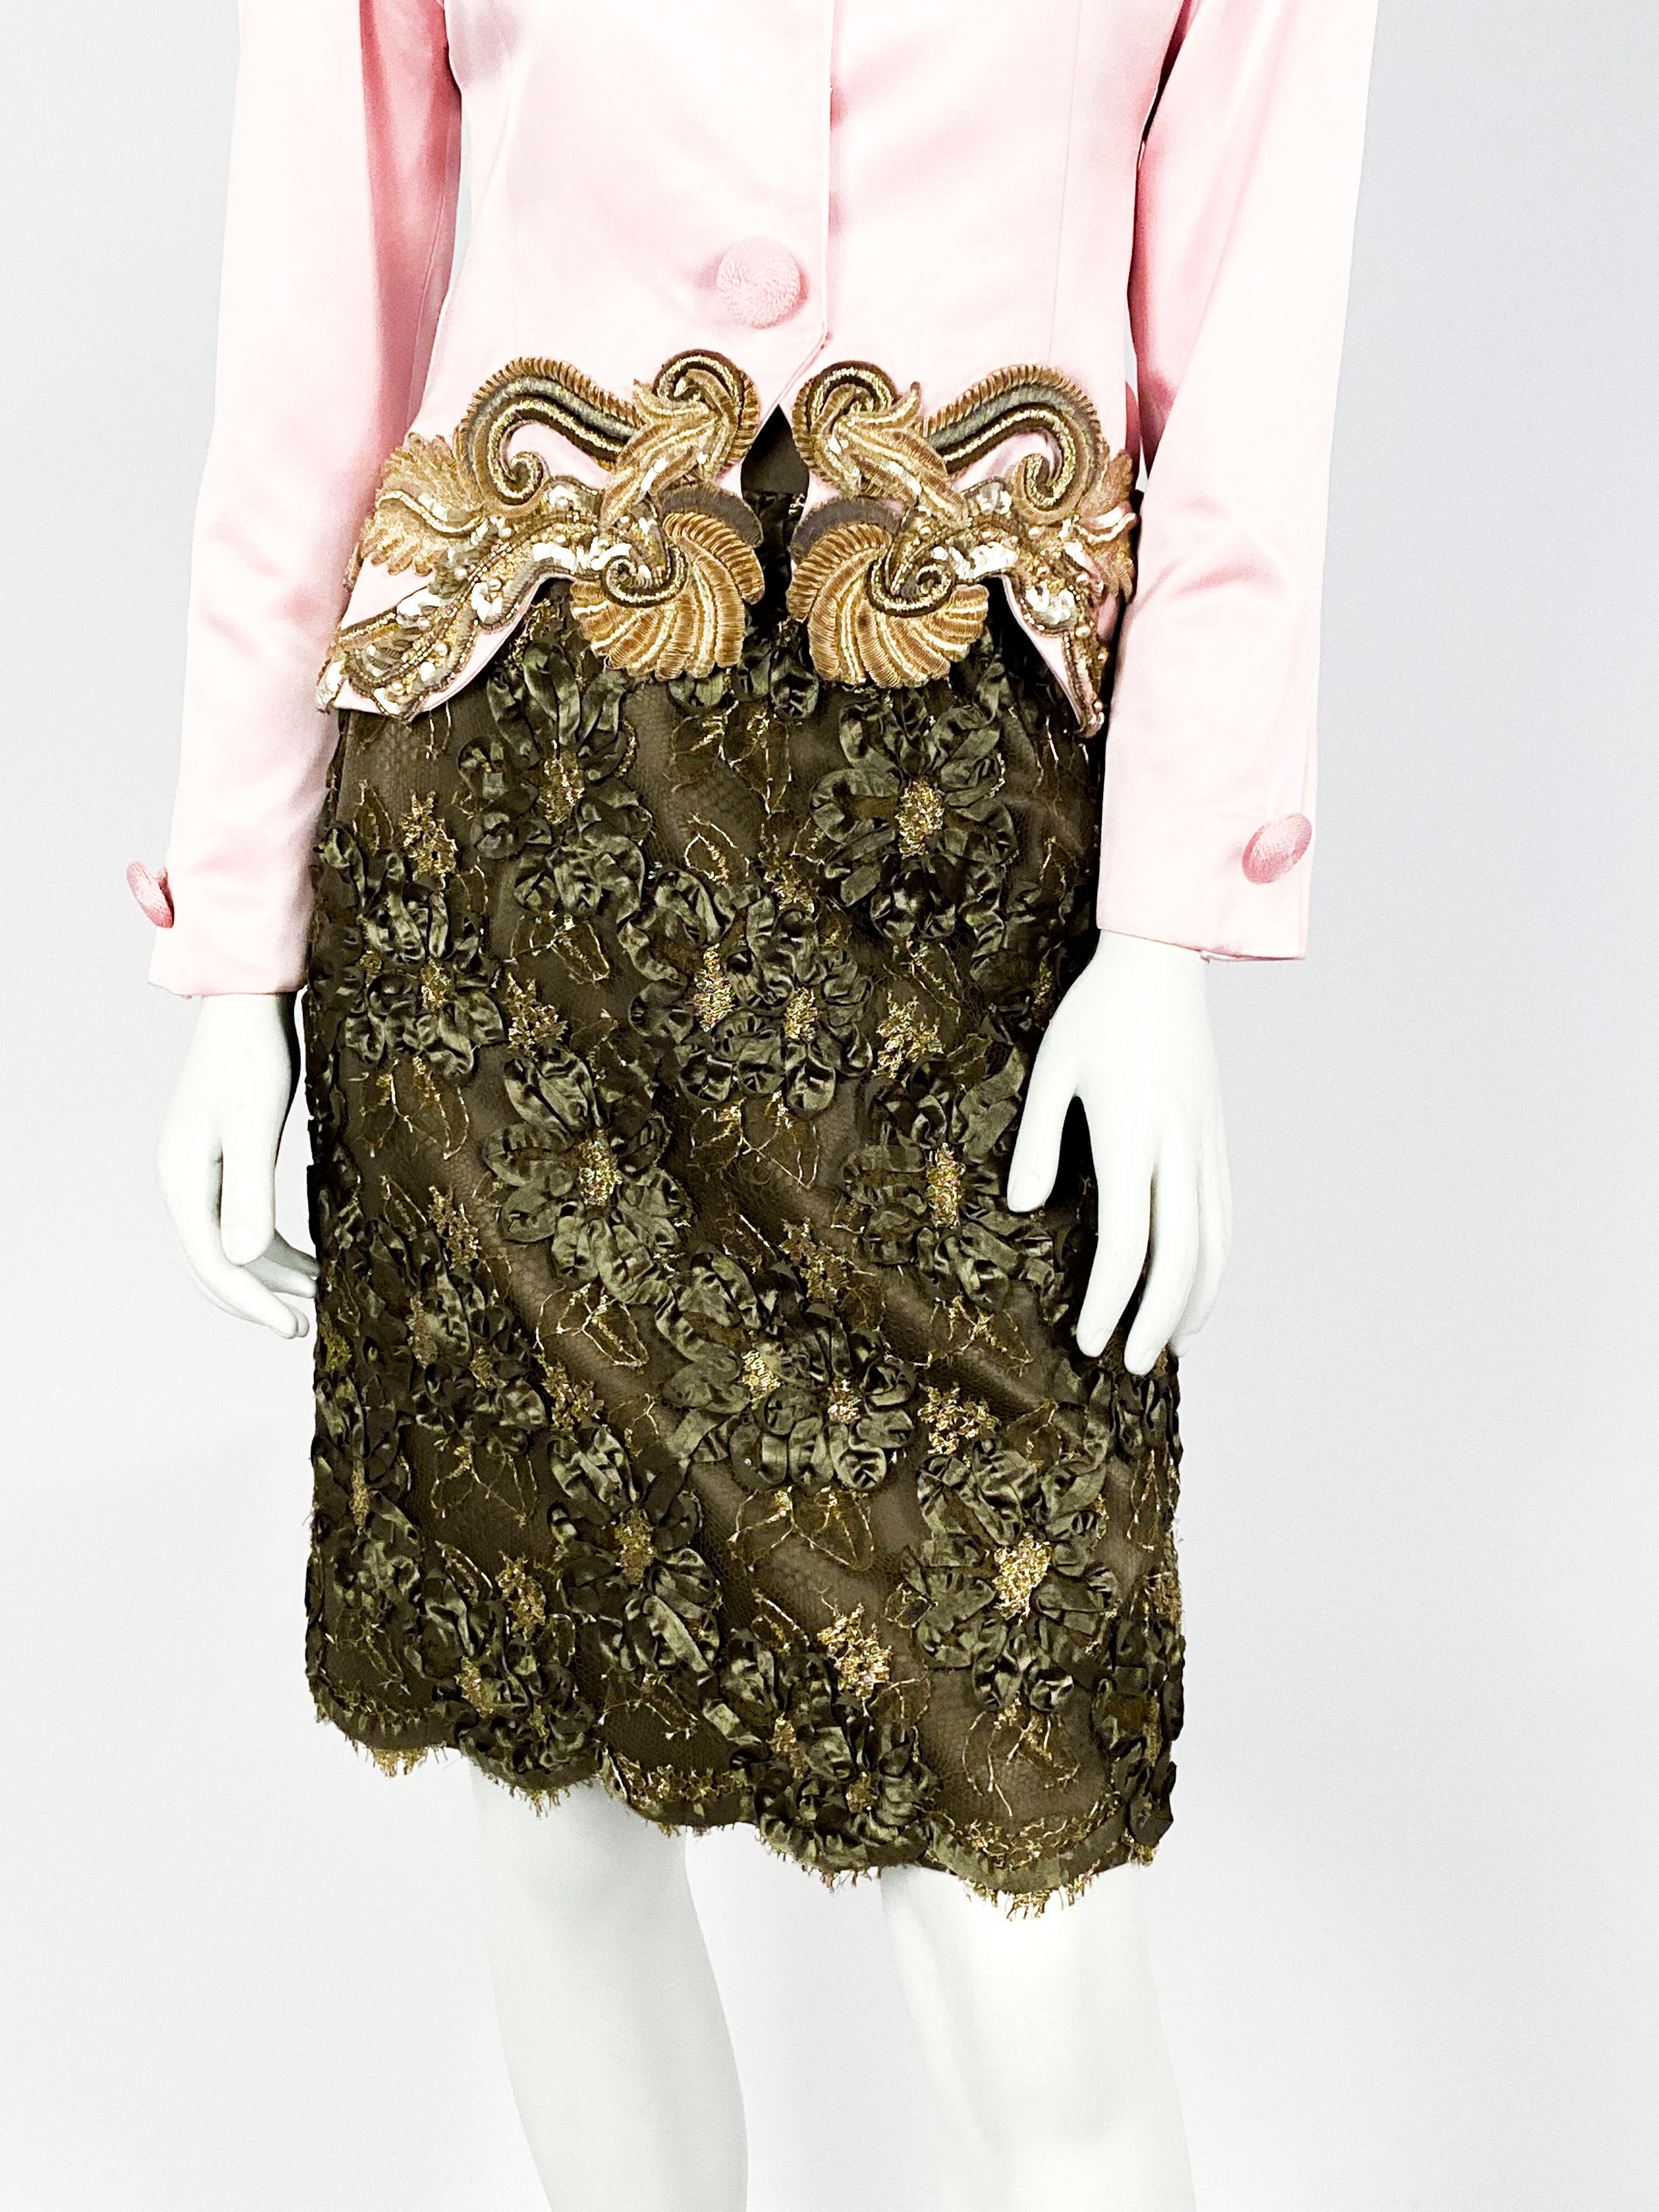 1990s Bill Blass silk-satin soft pink jacket with demensional passemterie applique, cordé covered buttons, and snap/hook closure. The skirt is an olive green color with ribbon work and metallic treading applied on mesh.  The hem of the jacket is